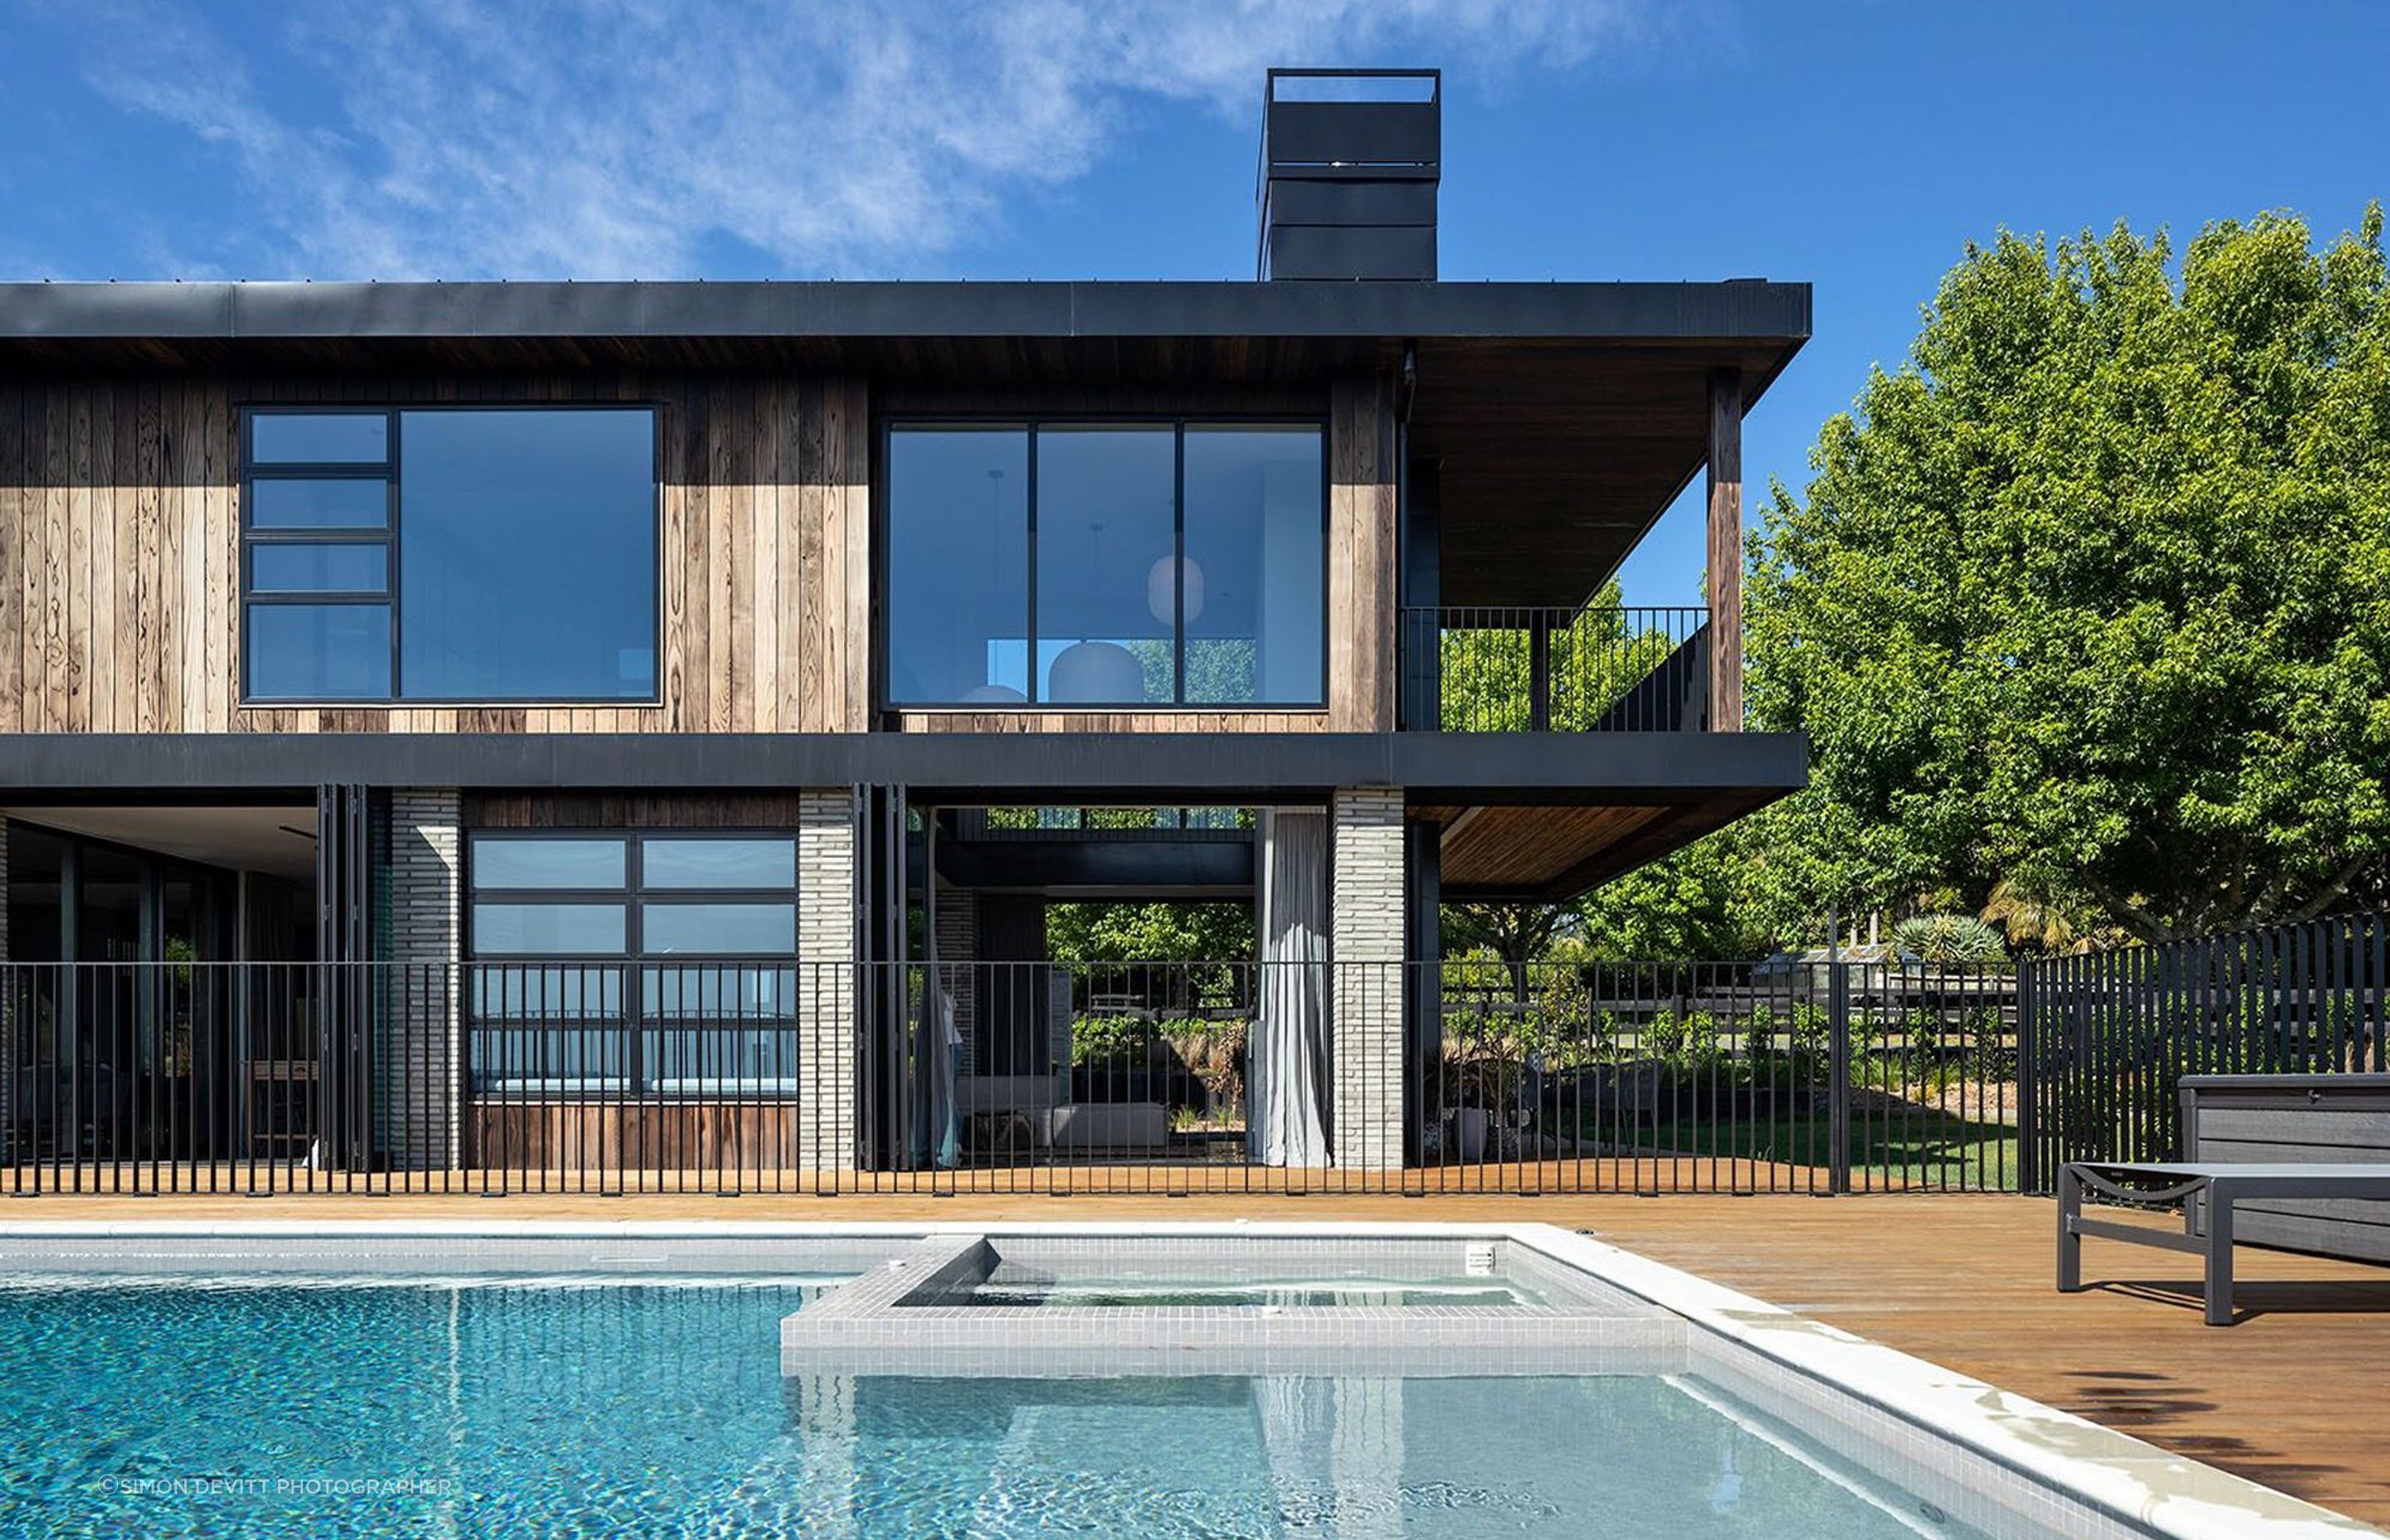 An infinity pool stretches out in front of the house, further affirming the directional gaze and connection with this rural coastal landscape. 